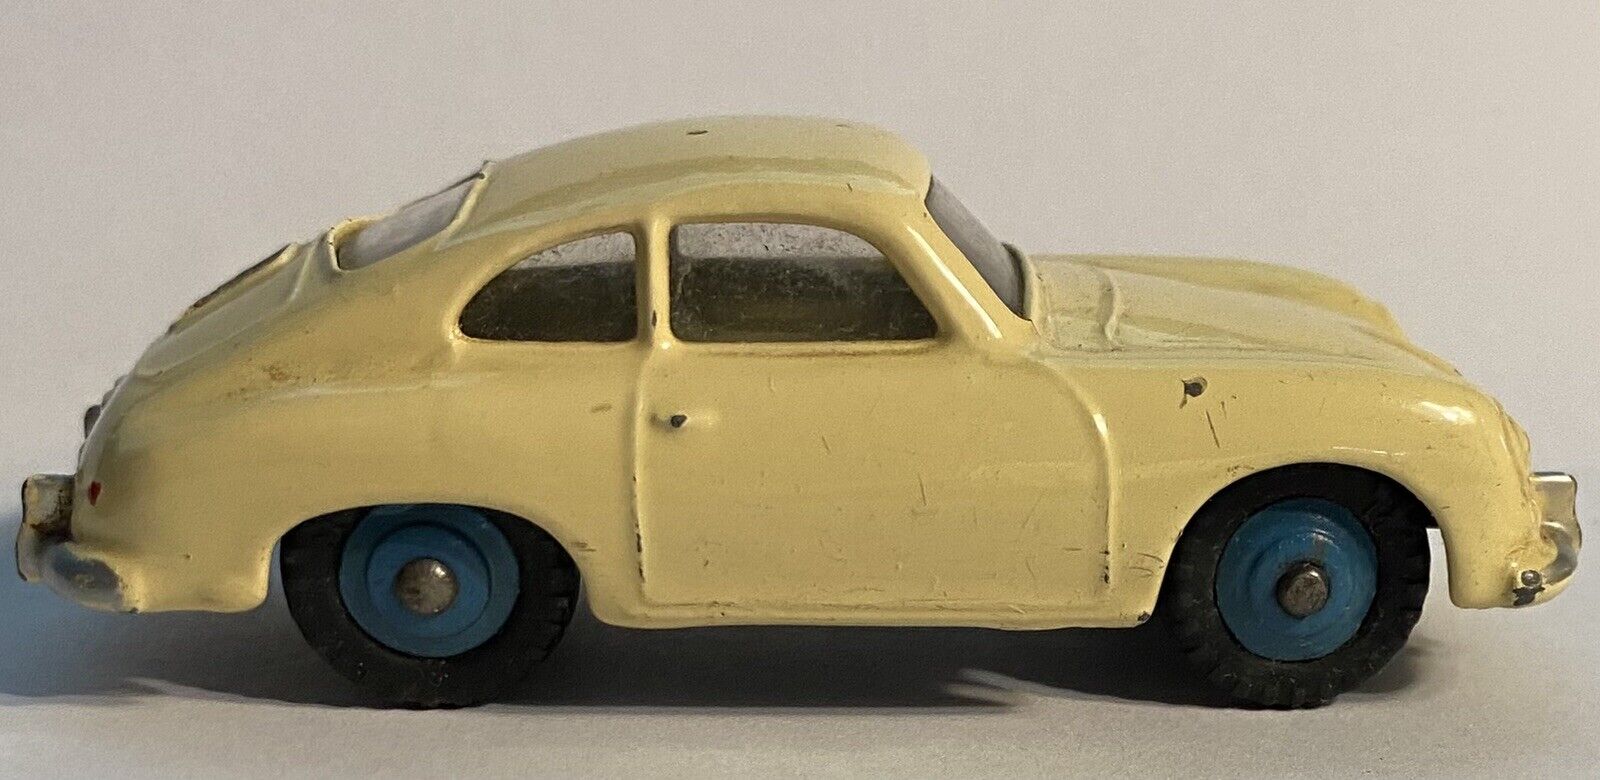 DINKY 182 OFF WHITE PORSCHE 356A TOY CAR 1:43 MADE IN ENGLAND VG+++ (8.5)